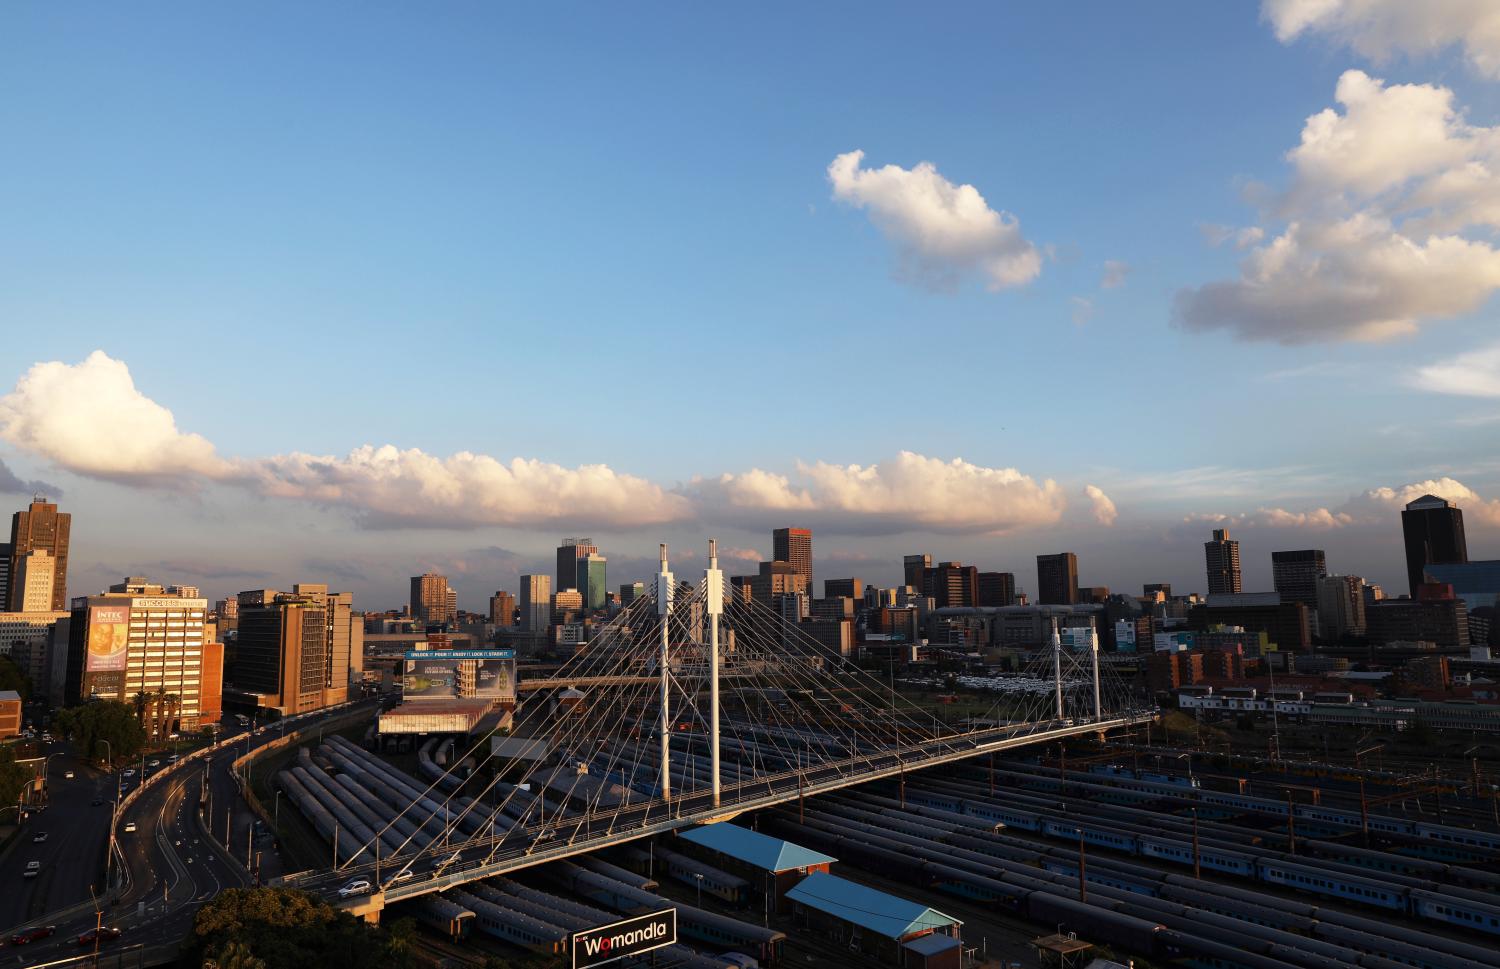 The city of Johannesburg over looks the Mandela bridge, with trains parked underneath in Johannesburg, South Africa, November 29, 2018. REUTERS/Siphiwe Sibeko - RC1A1A80F7F0